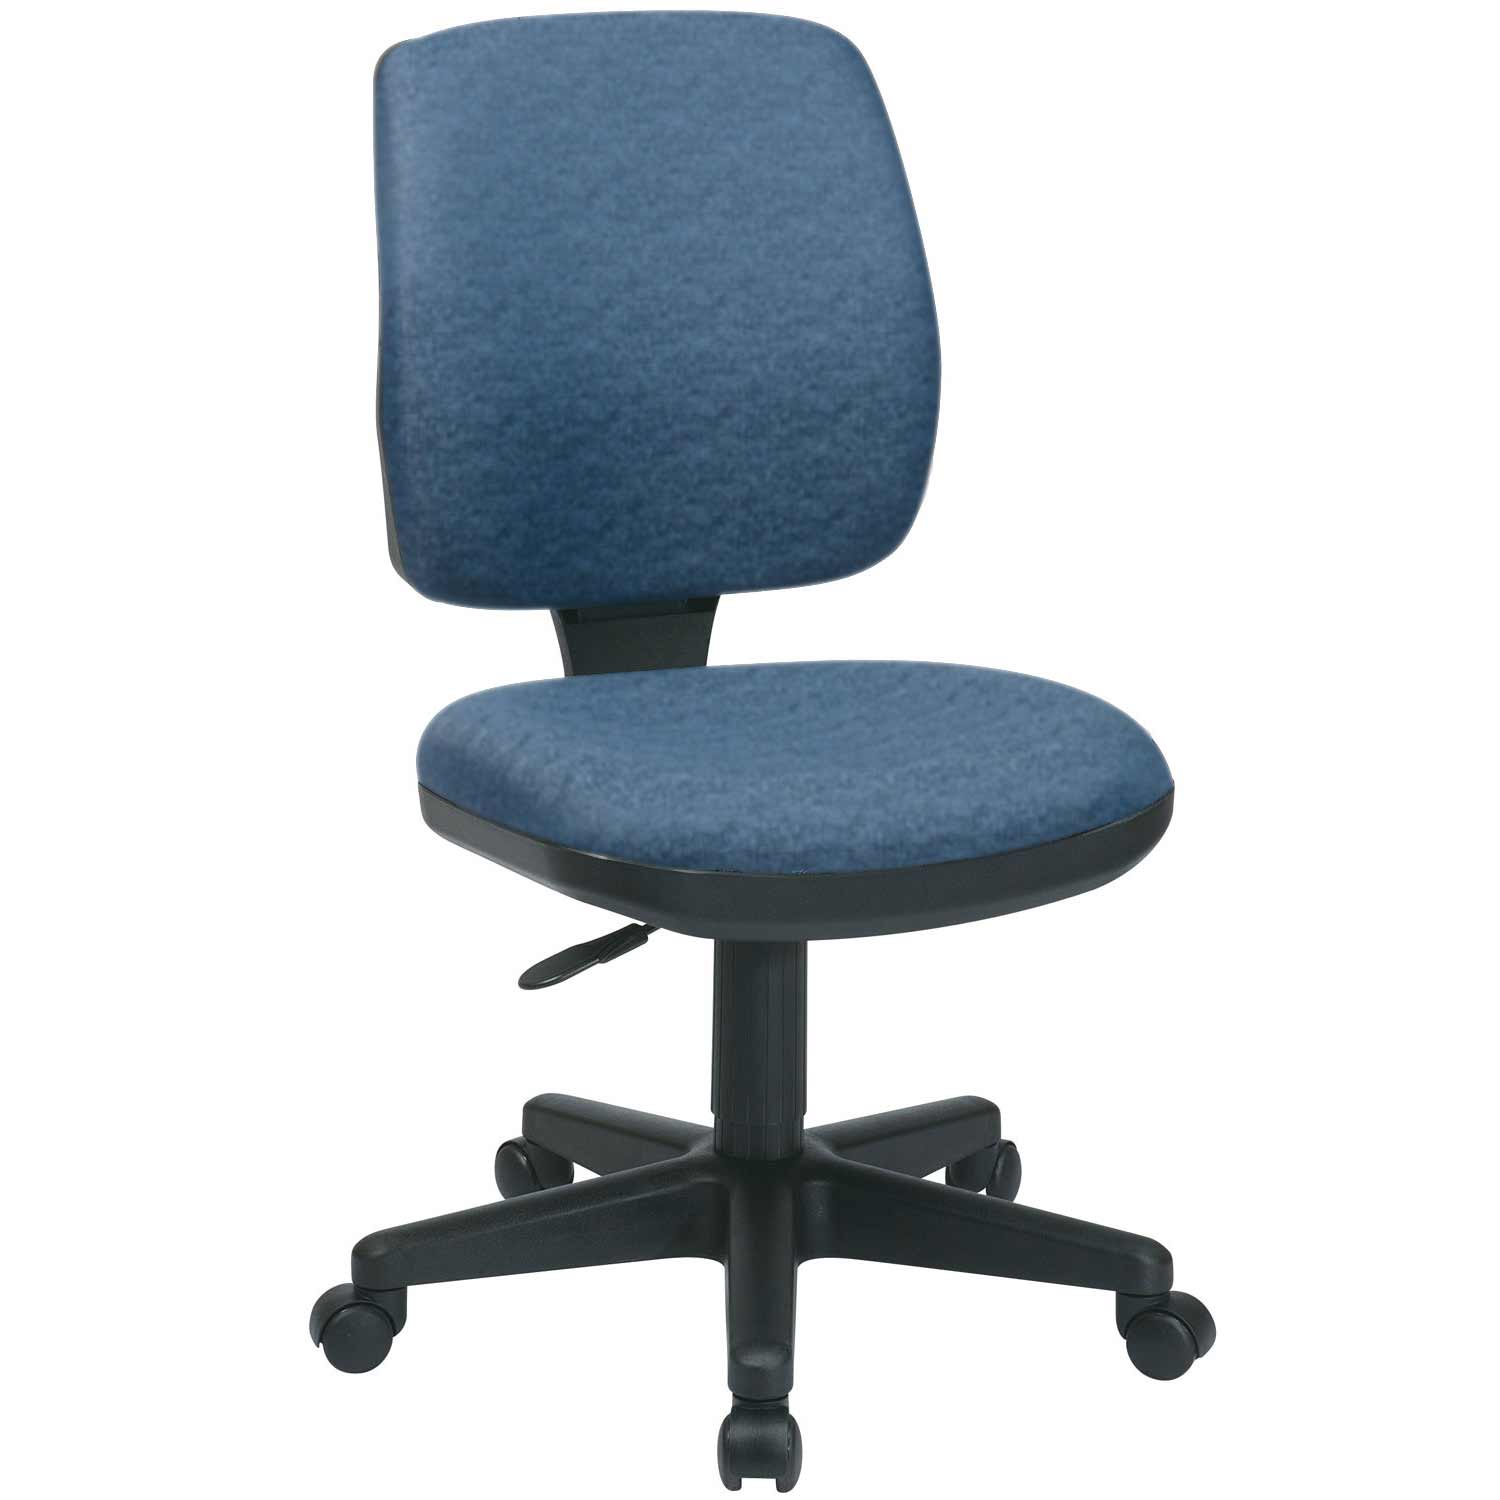 Armless Task Chairs for Home Office